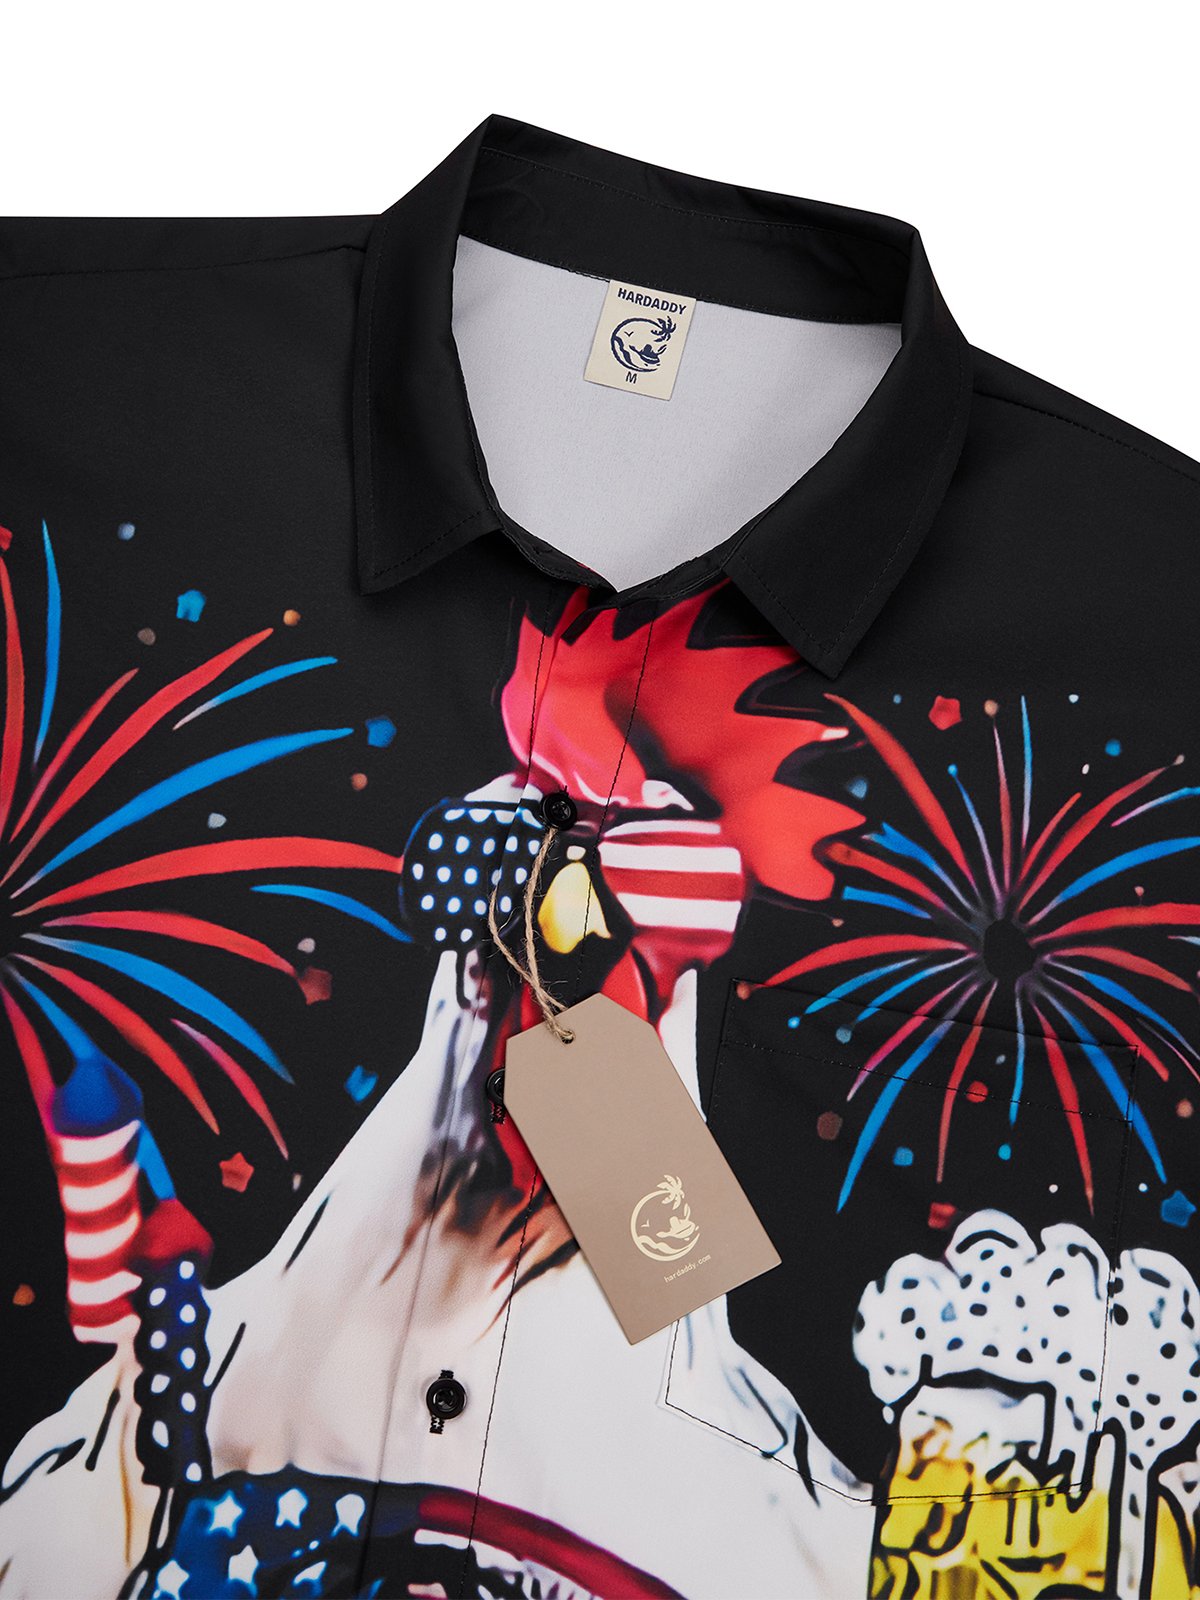 Hardaddy American Flag Rooster Chest Pocket Short Sleeve Casual Shirt